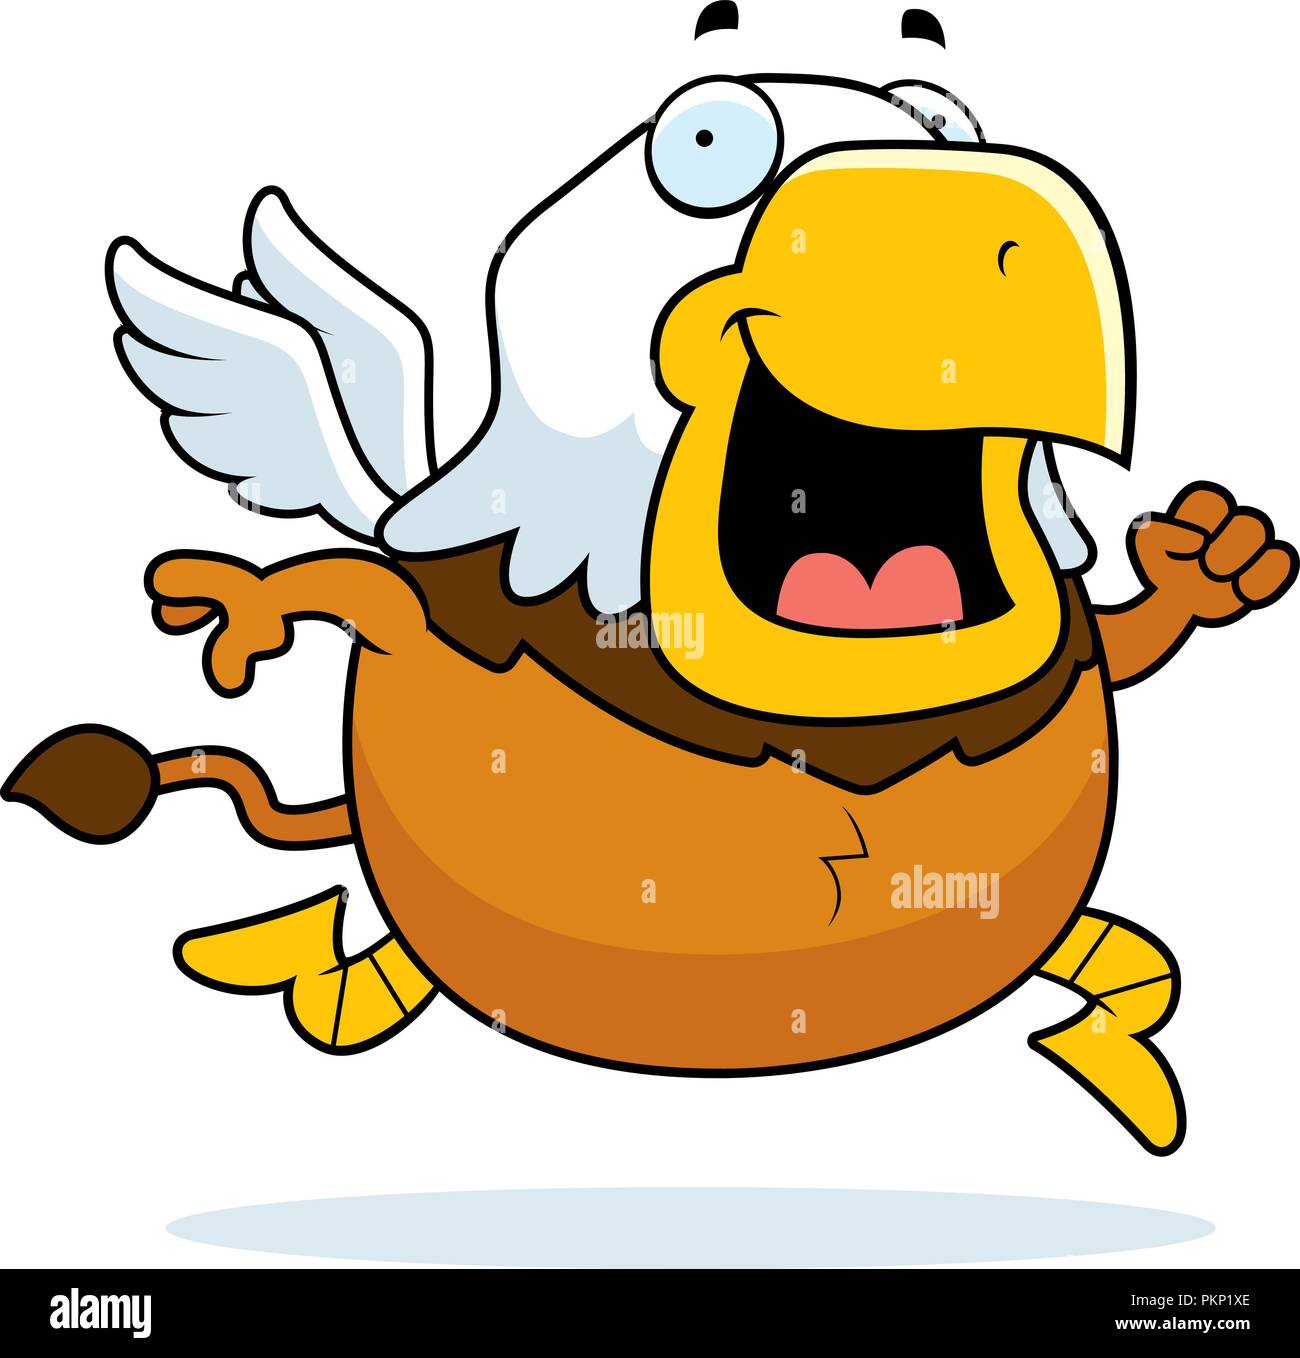 A cartoon illustration of a griffin running and smiling. Stock Vector